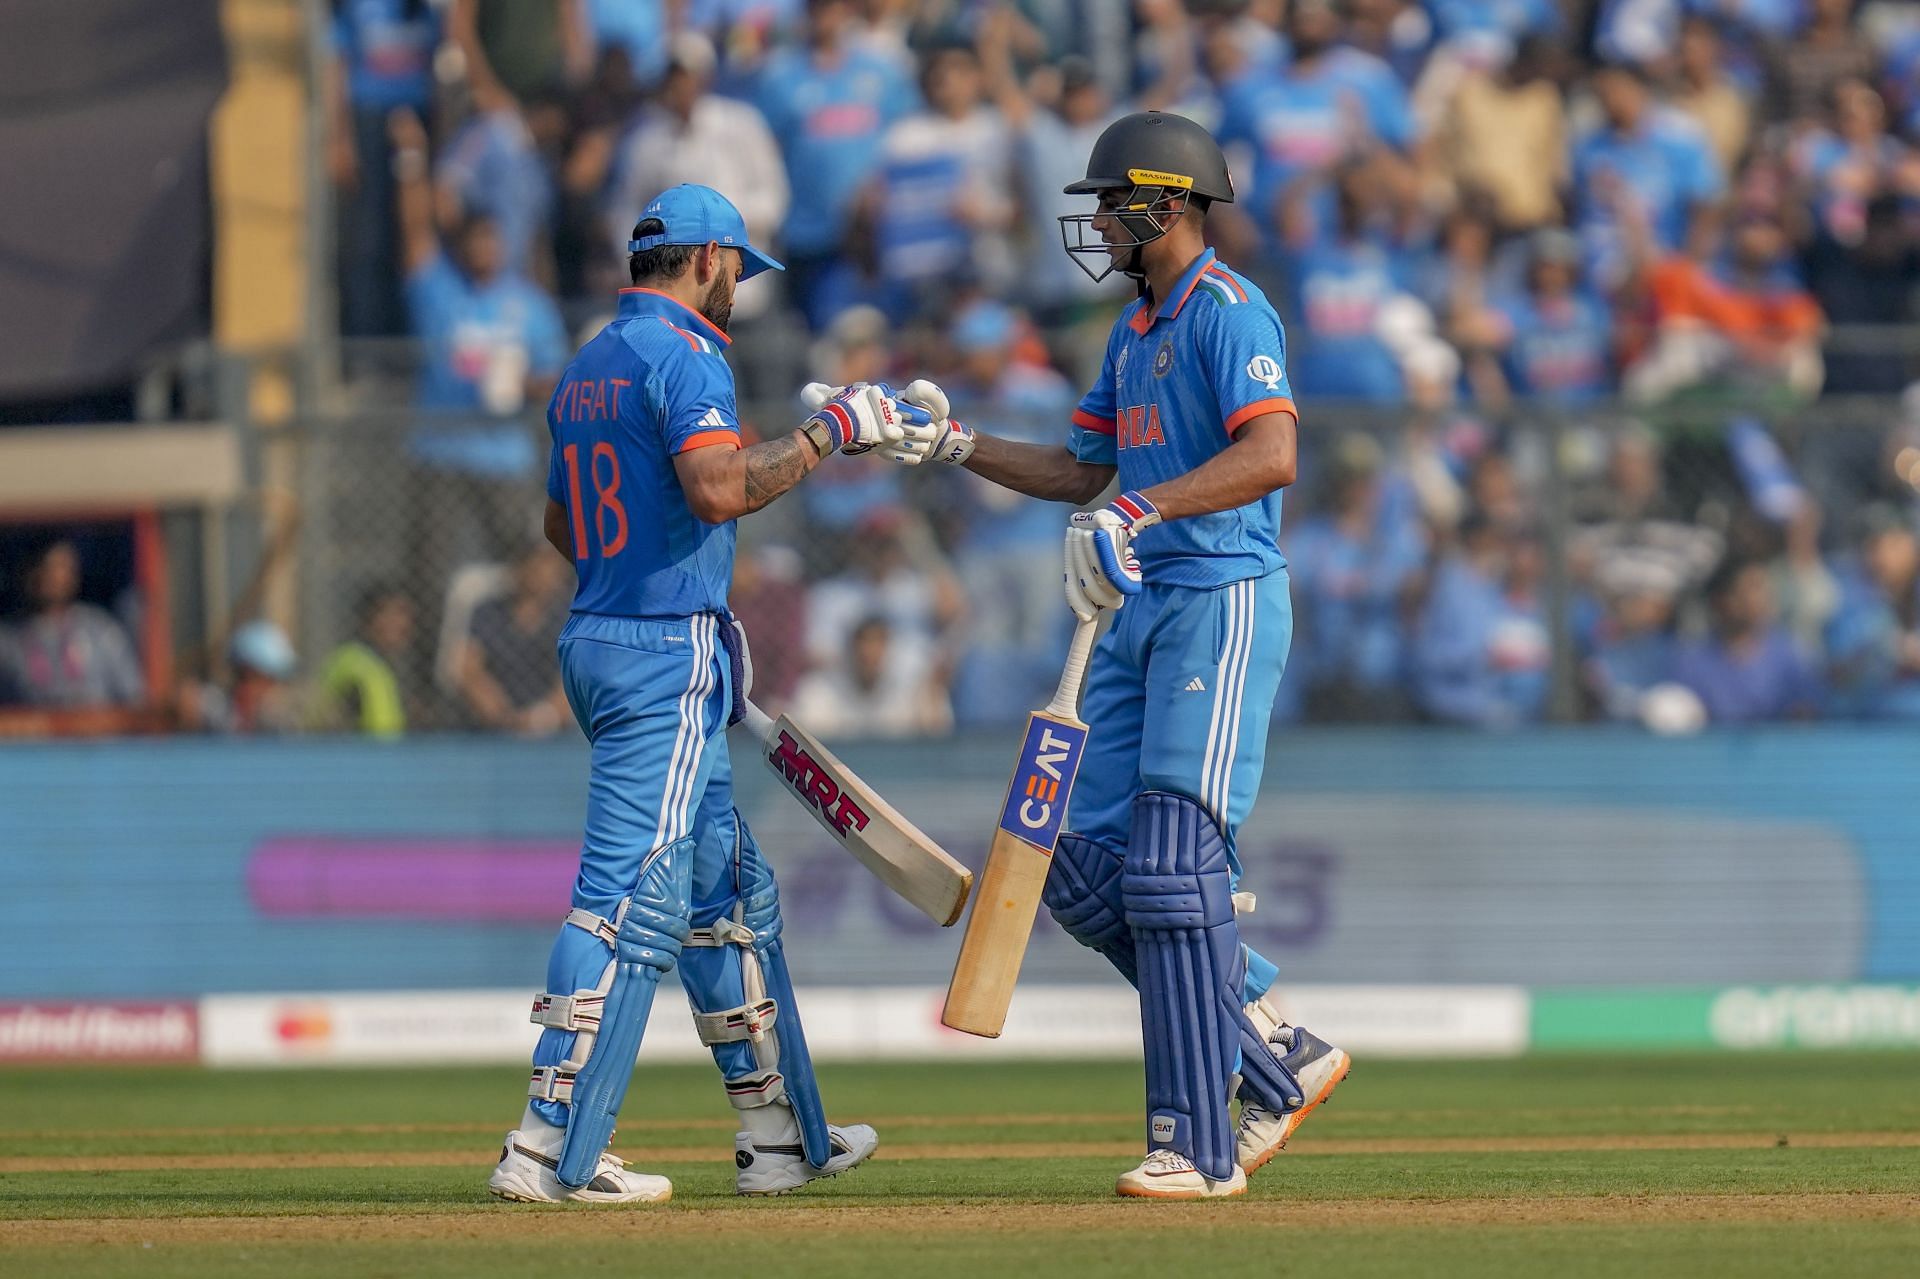 Virat Kohli and Shubman Gill added 189 runs for the second wicket. [P/C: AP]